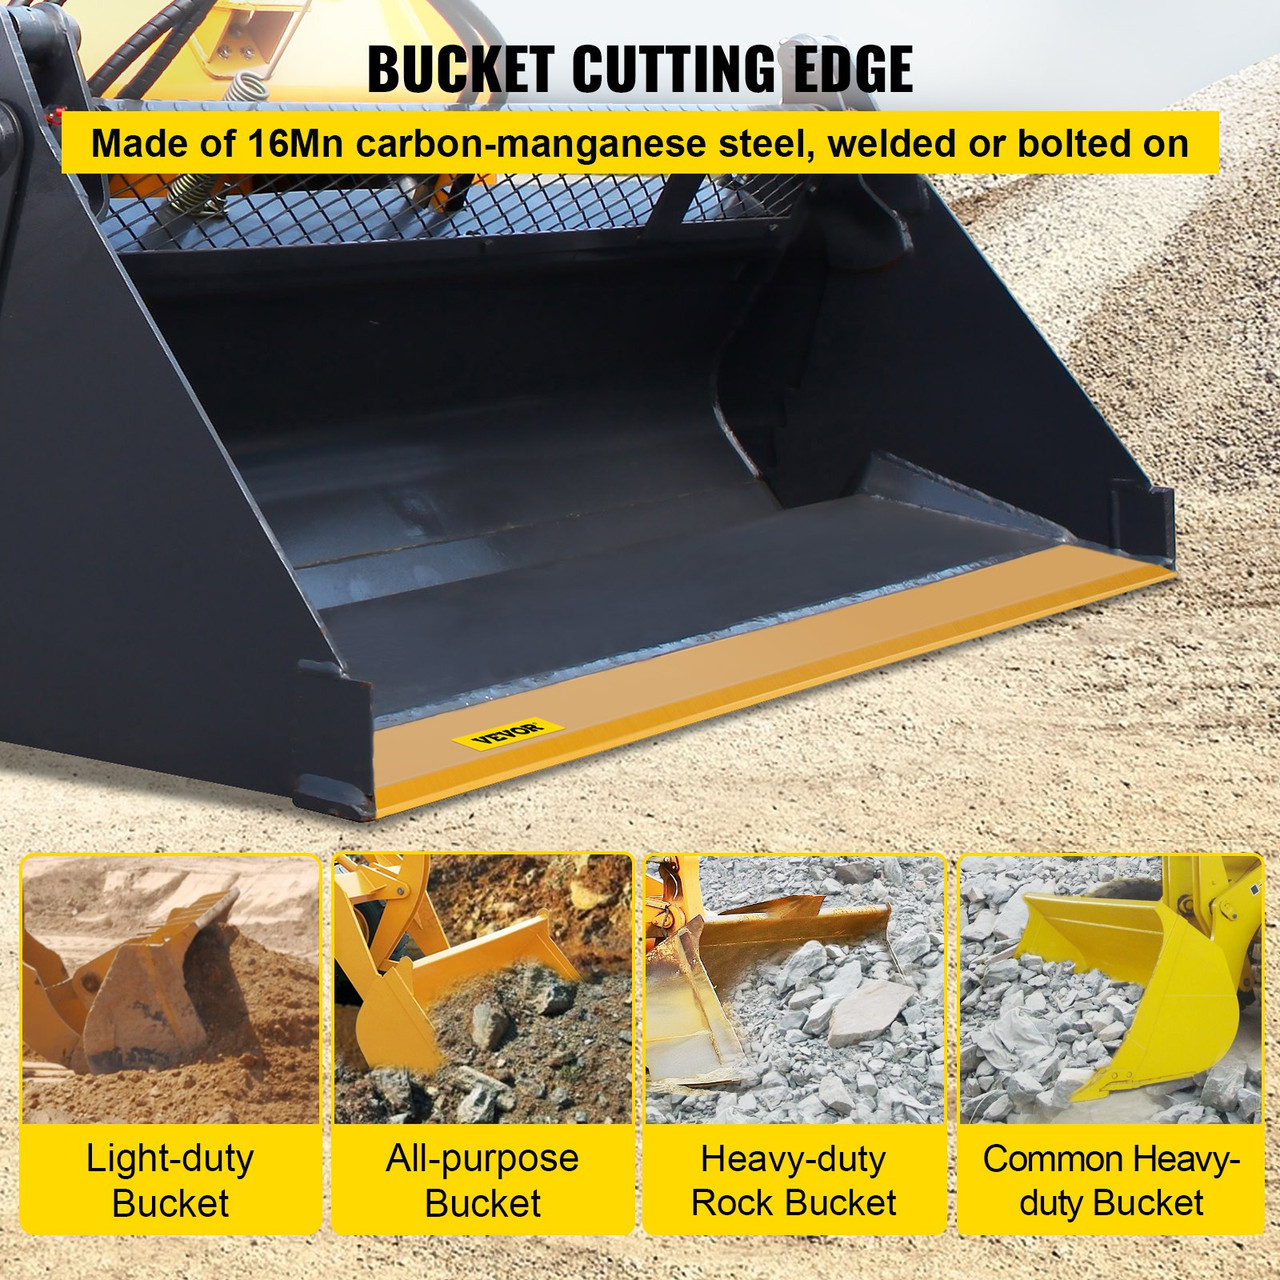 Bucket Cutting Edge, 66x4x1/2" Bucket Edge, Weld-on and Bolt-on Advanced Cutting Edge, 16Mn Carbon-manganese Steel Loader Cutting Edge, Skid Steer Cutting Edge w/ Paint for Excavator and Loader